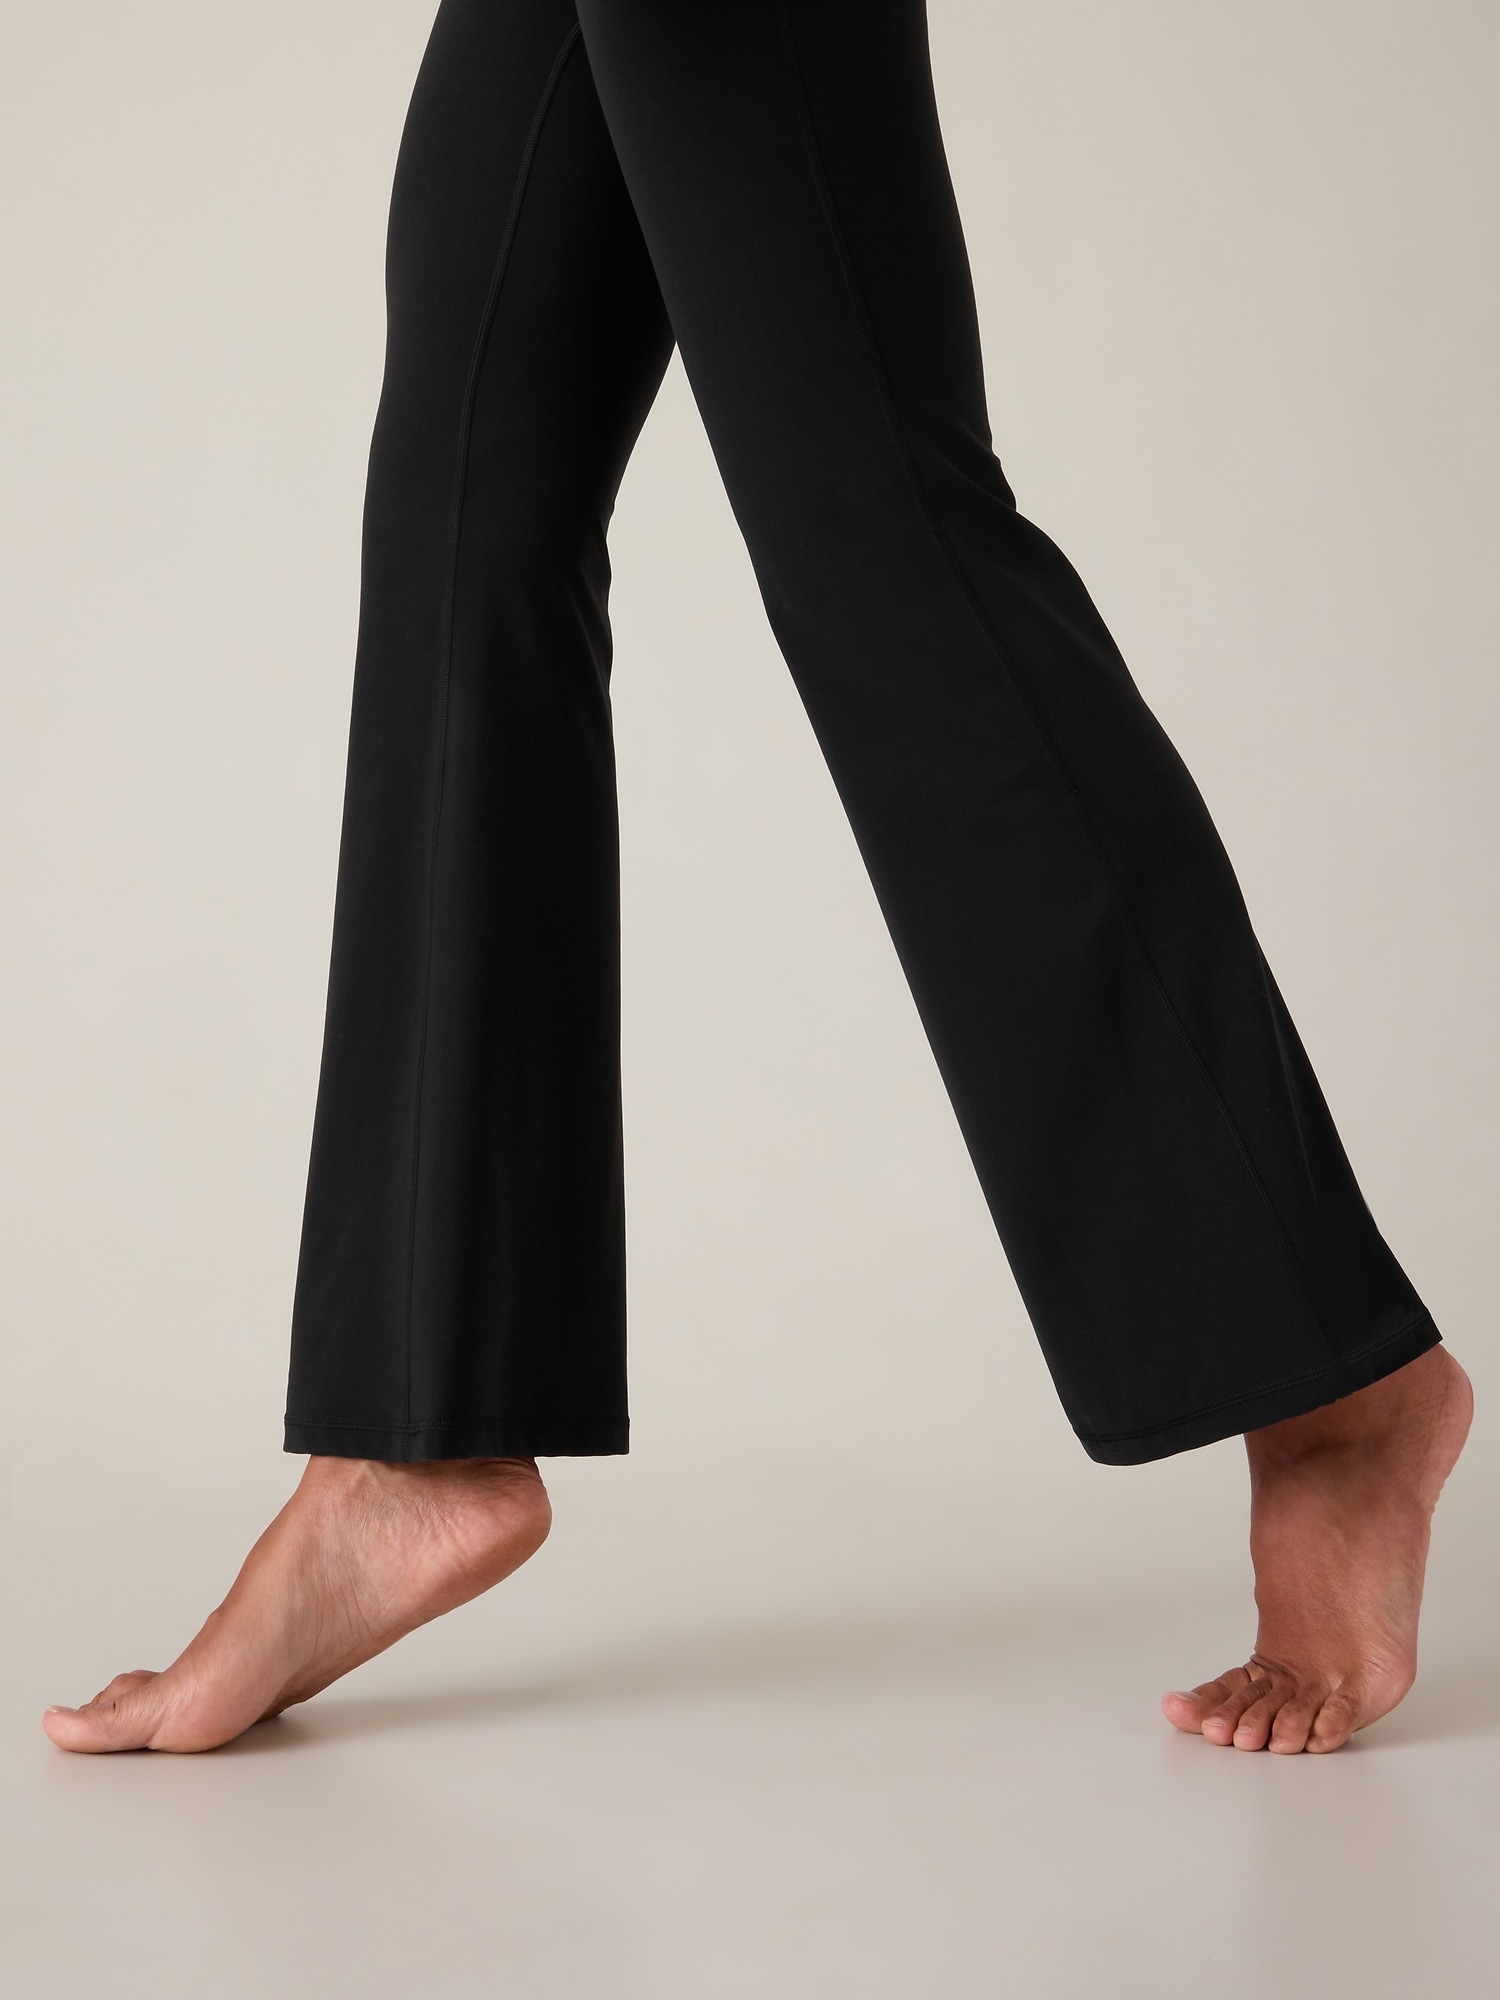 YOURS BESTSELLER Curve Black Wide Leg Pull On Stretch Jersey Yoga Pants